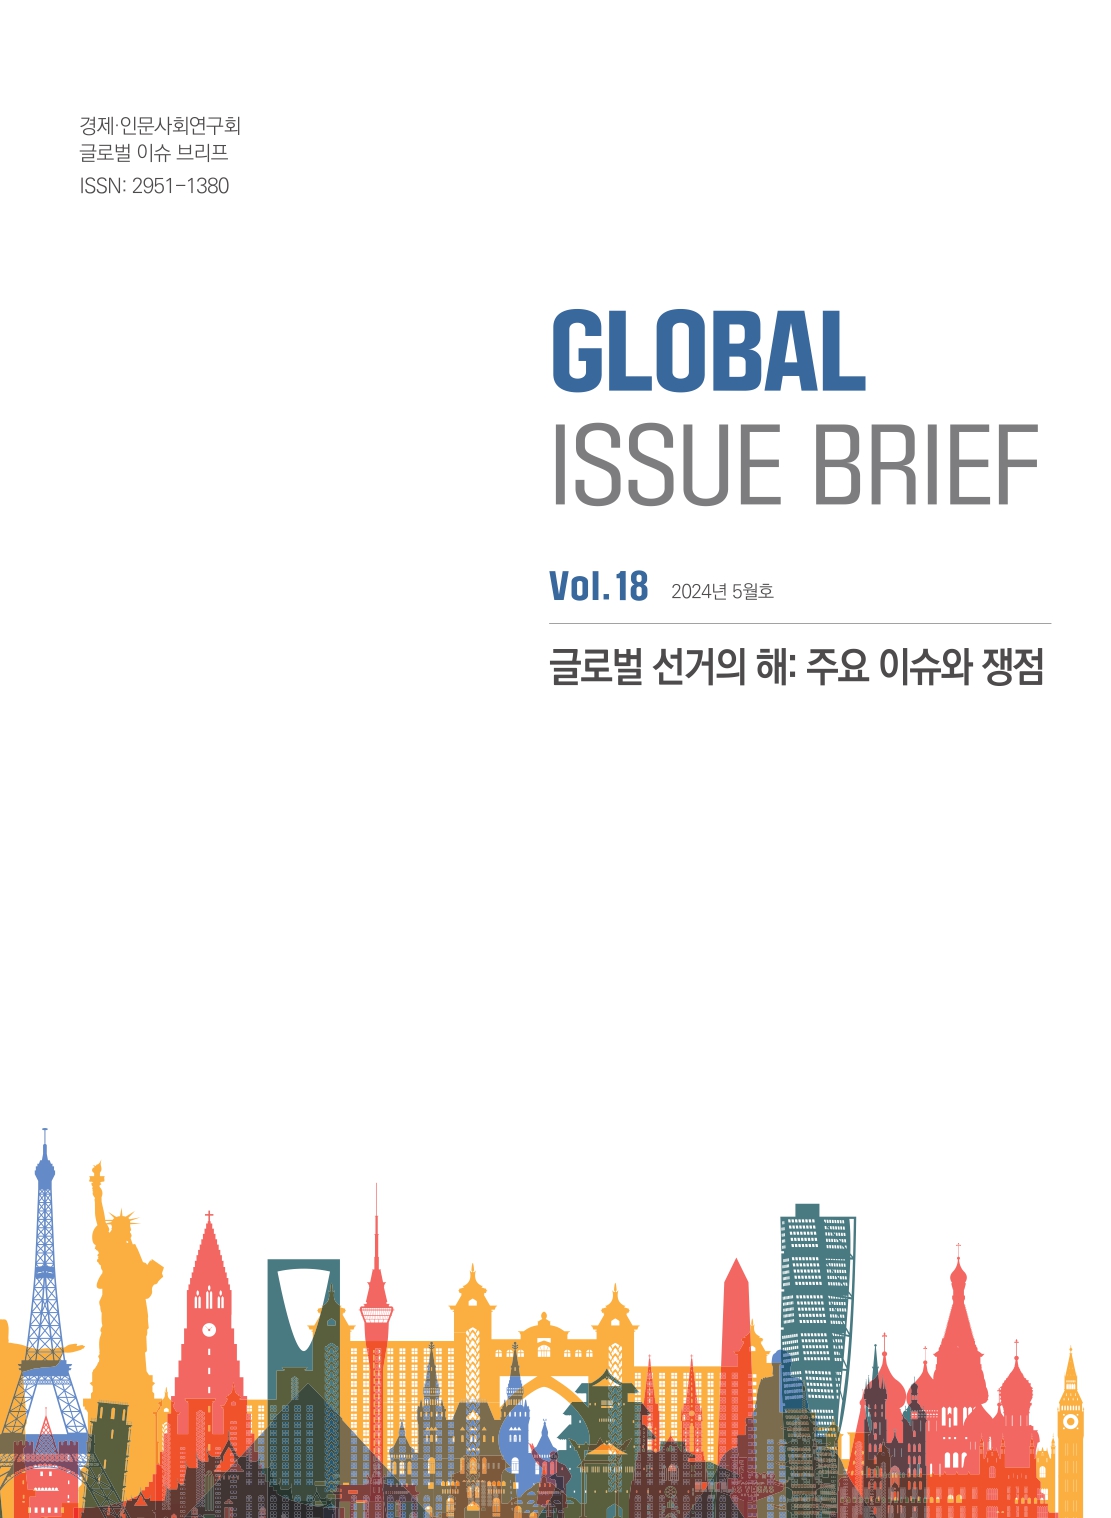 [Global Issue Brief] Vol.18